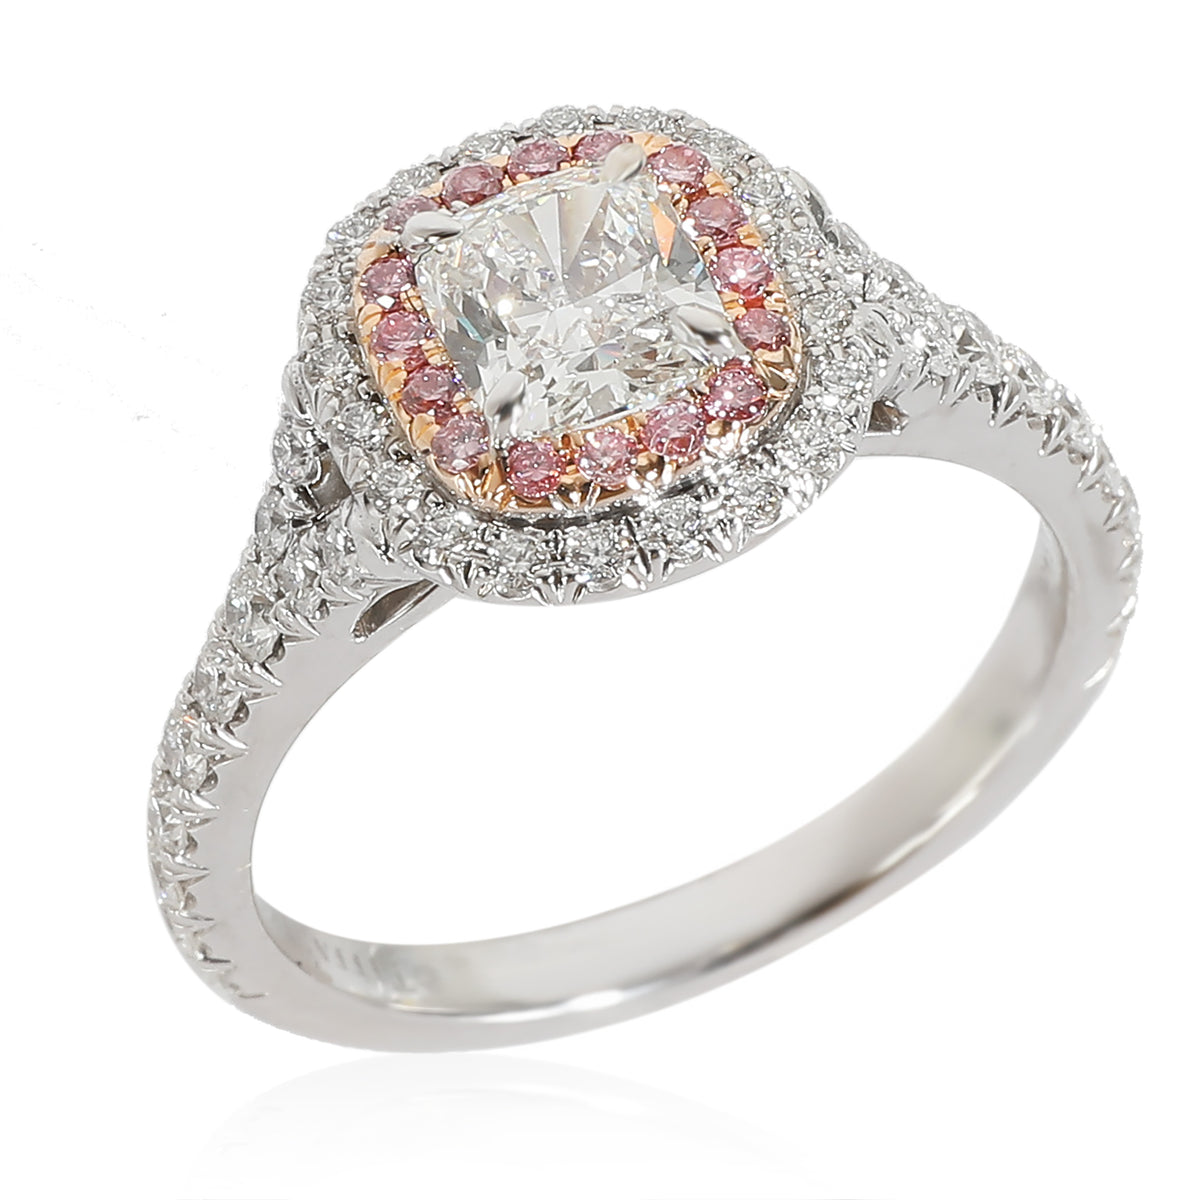 Soleste Engagement Ring in 18k Pink Gold/Platinum F IF 0.86 CTW